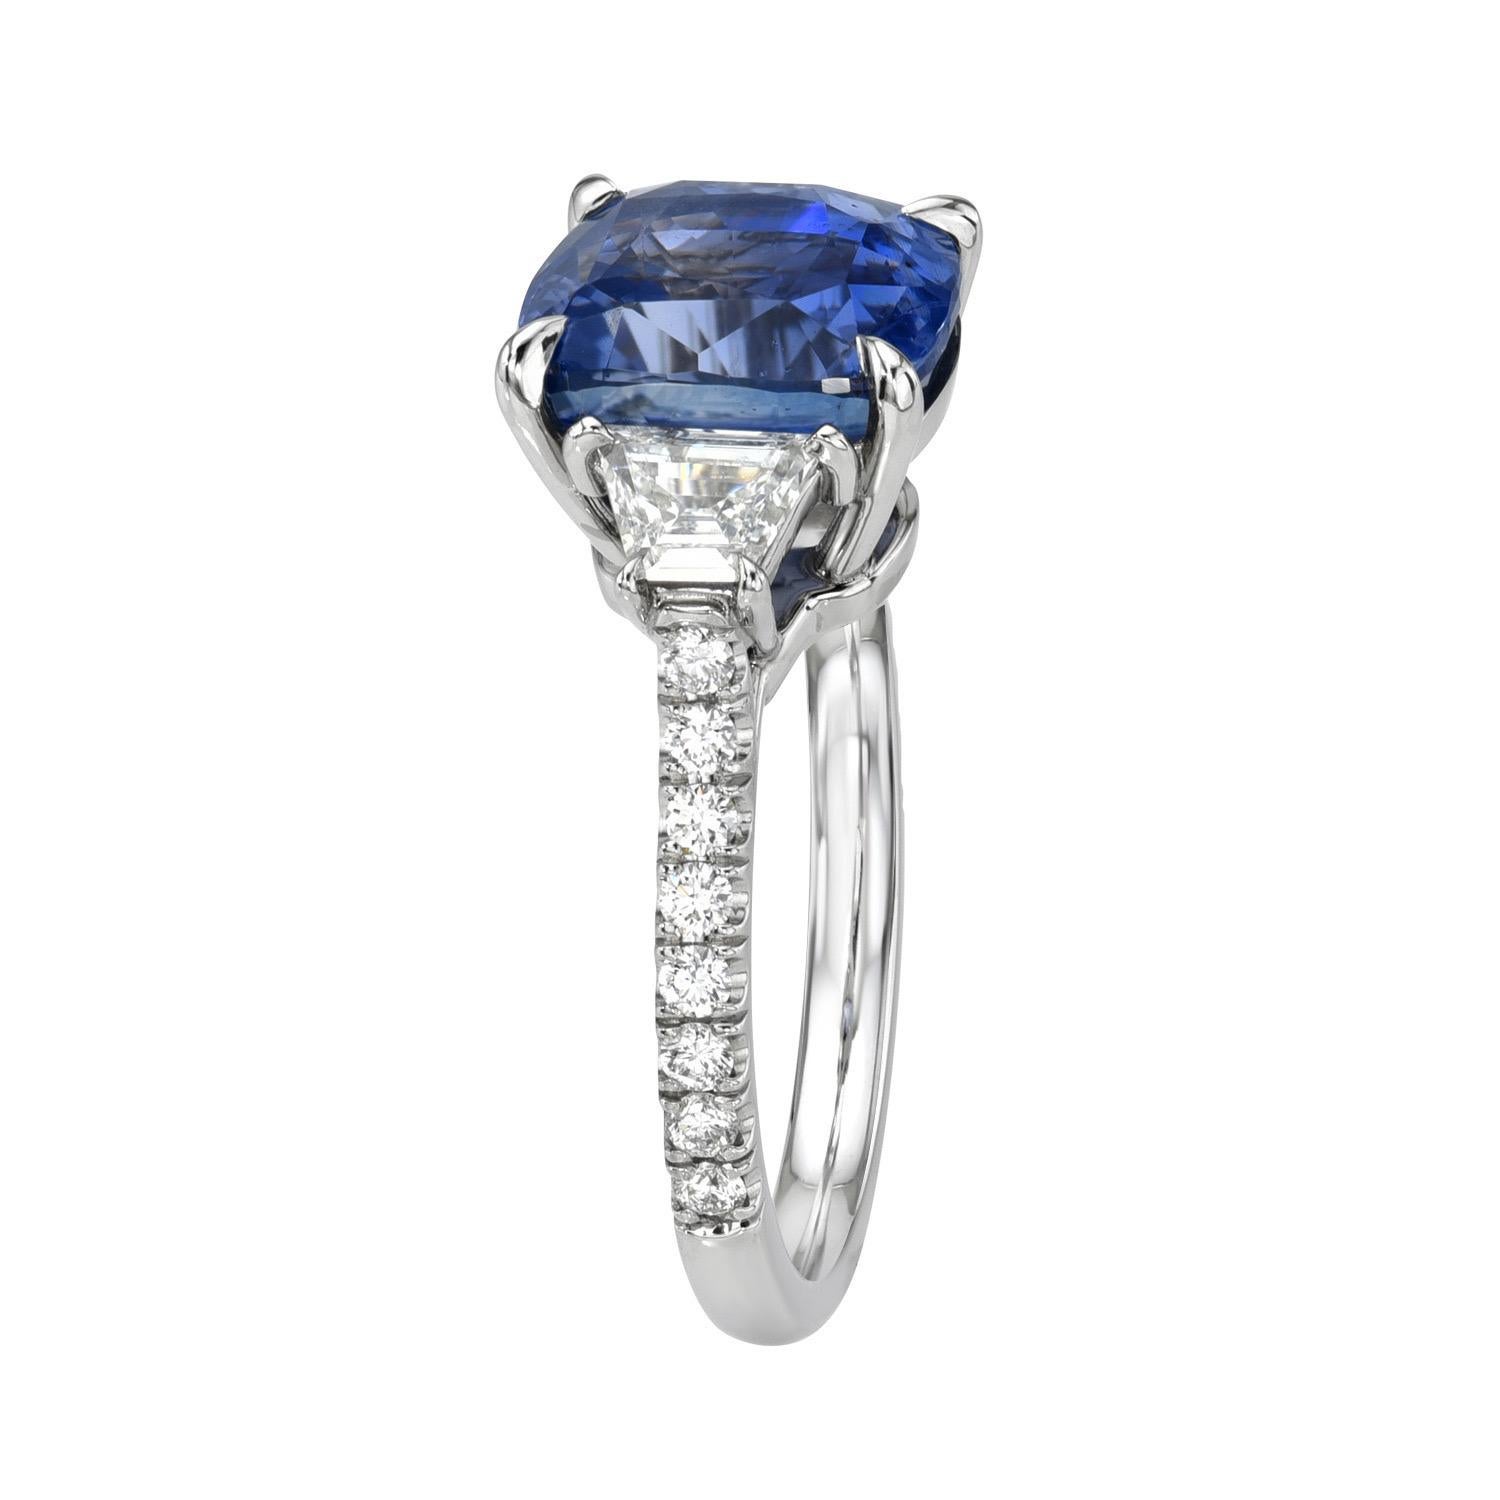 Splendid 5.59 carat Unheated Ceylon Blue Sapphire cushion, three stone platinum ring, flanked by a pair of 0.45 carat, F/SI1 Trapezoid diamonds and a total of 0.25 carats round brilliant diamonds.
Ring size 6. Resizing is complementary upon